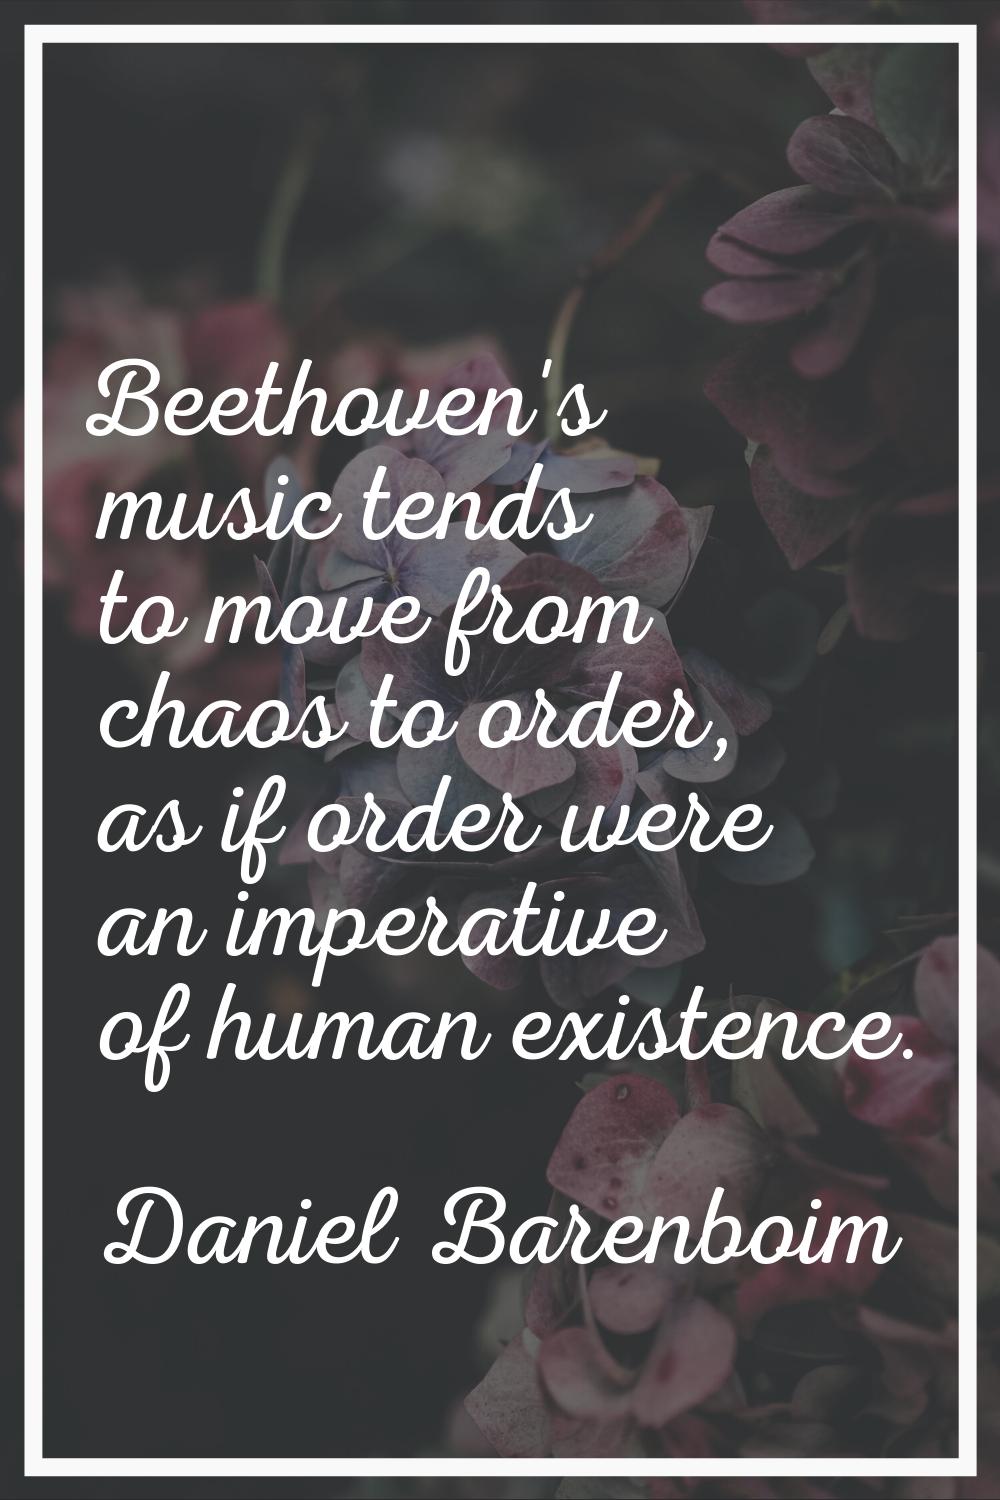 Beethoven's music tends to move from chaos to order, as if order were an imperative of human existe